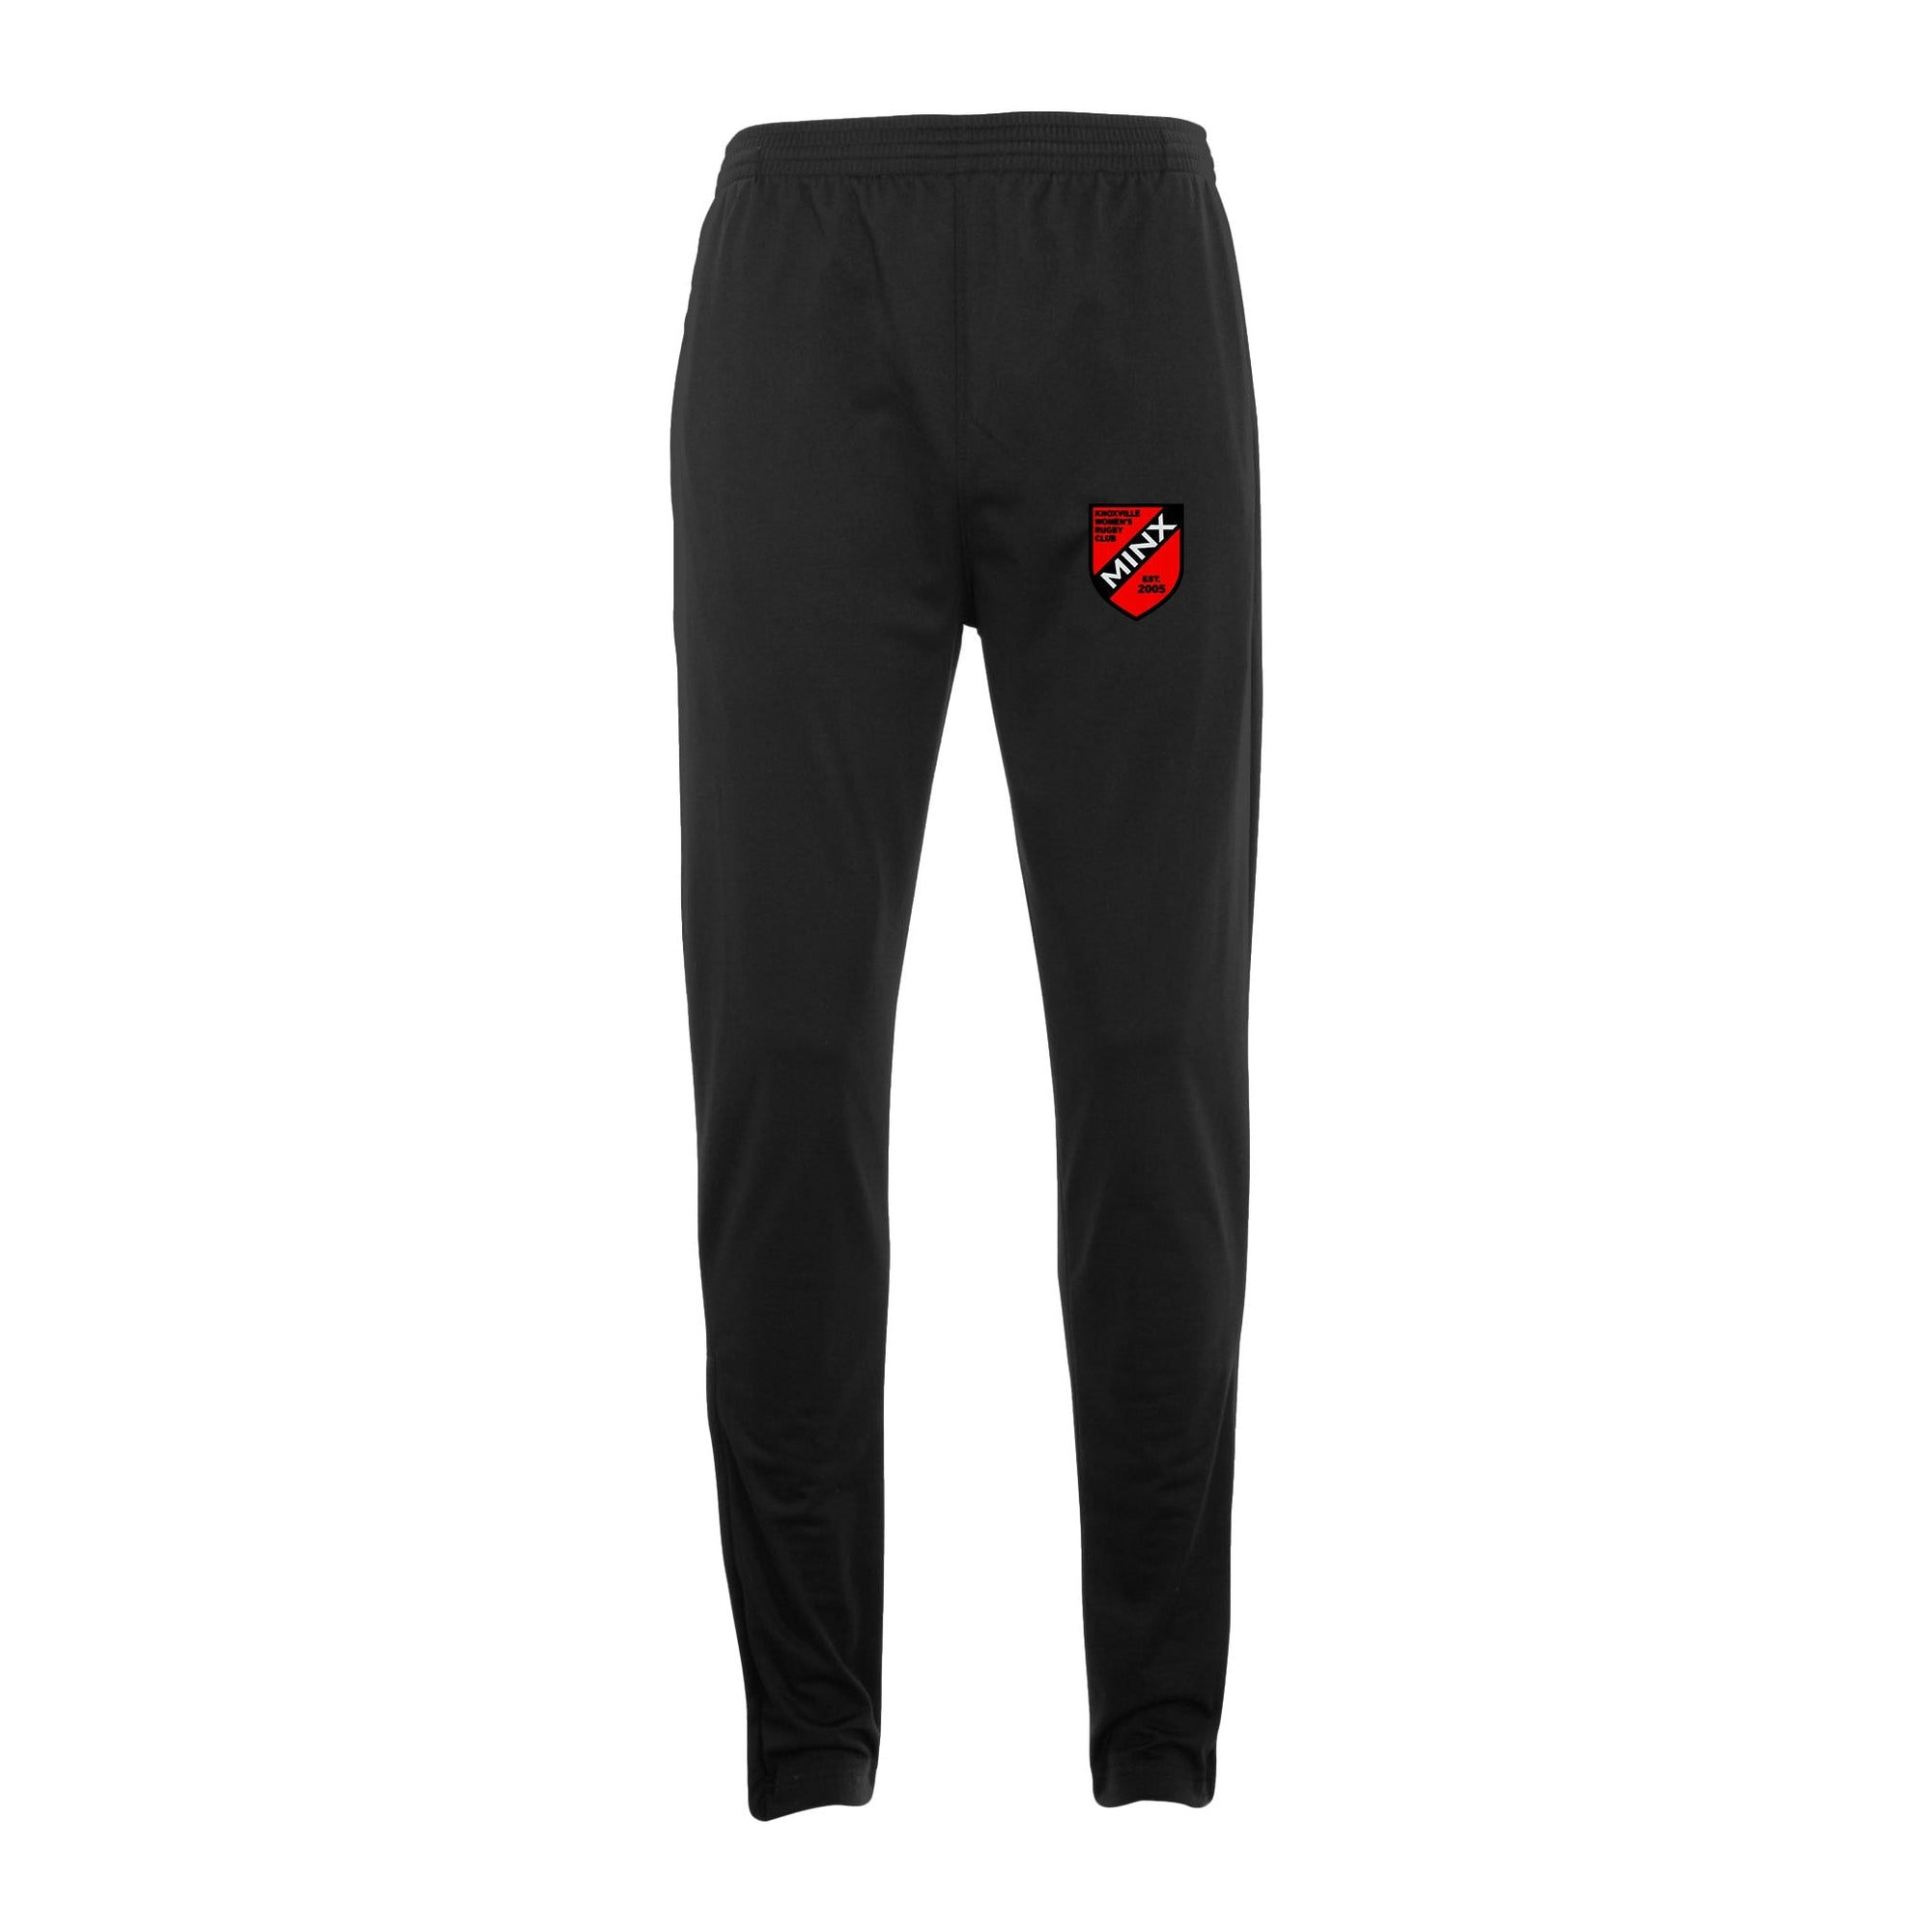 Rugby Imports Knoxville Minx Unisex Tapered Leg Pant